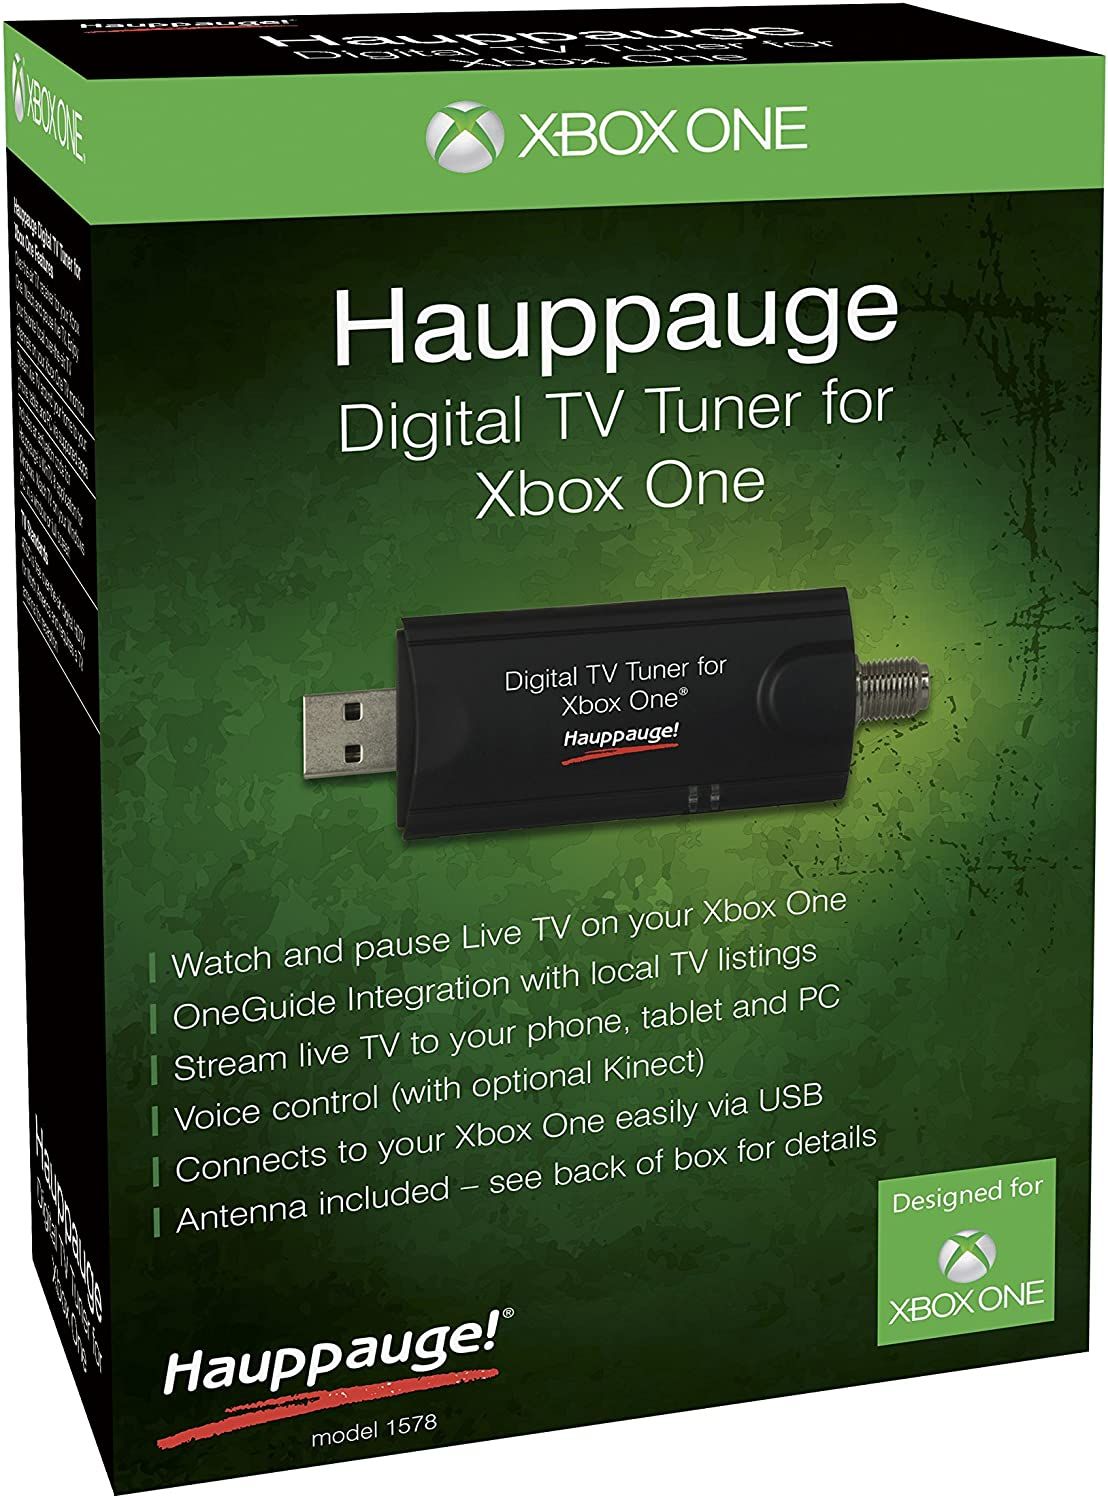 Hauppauge Digital TV Tuner for Xbox One in the box